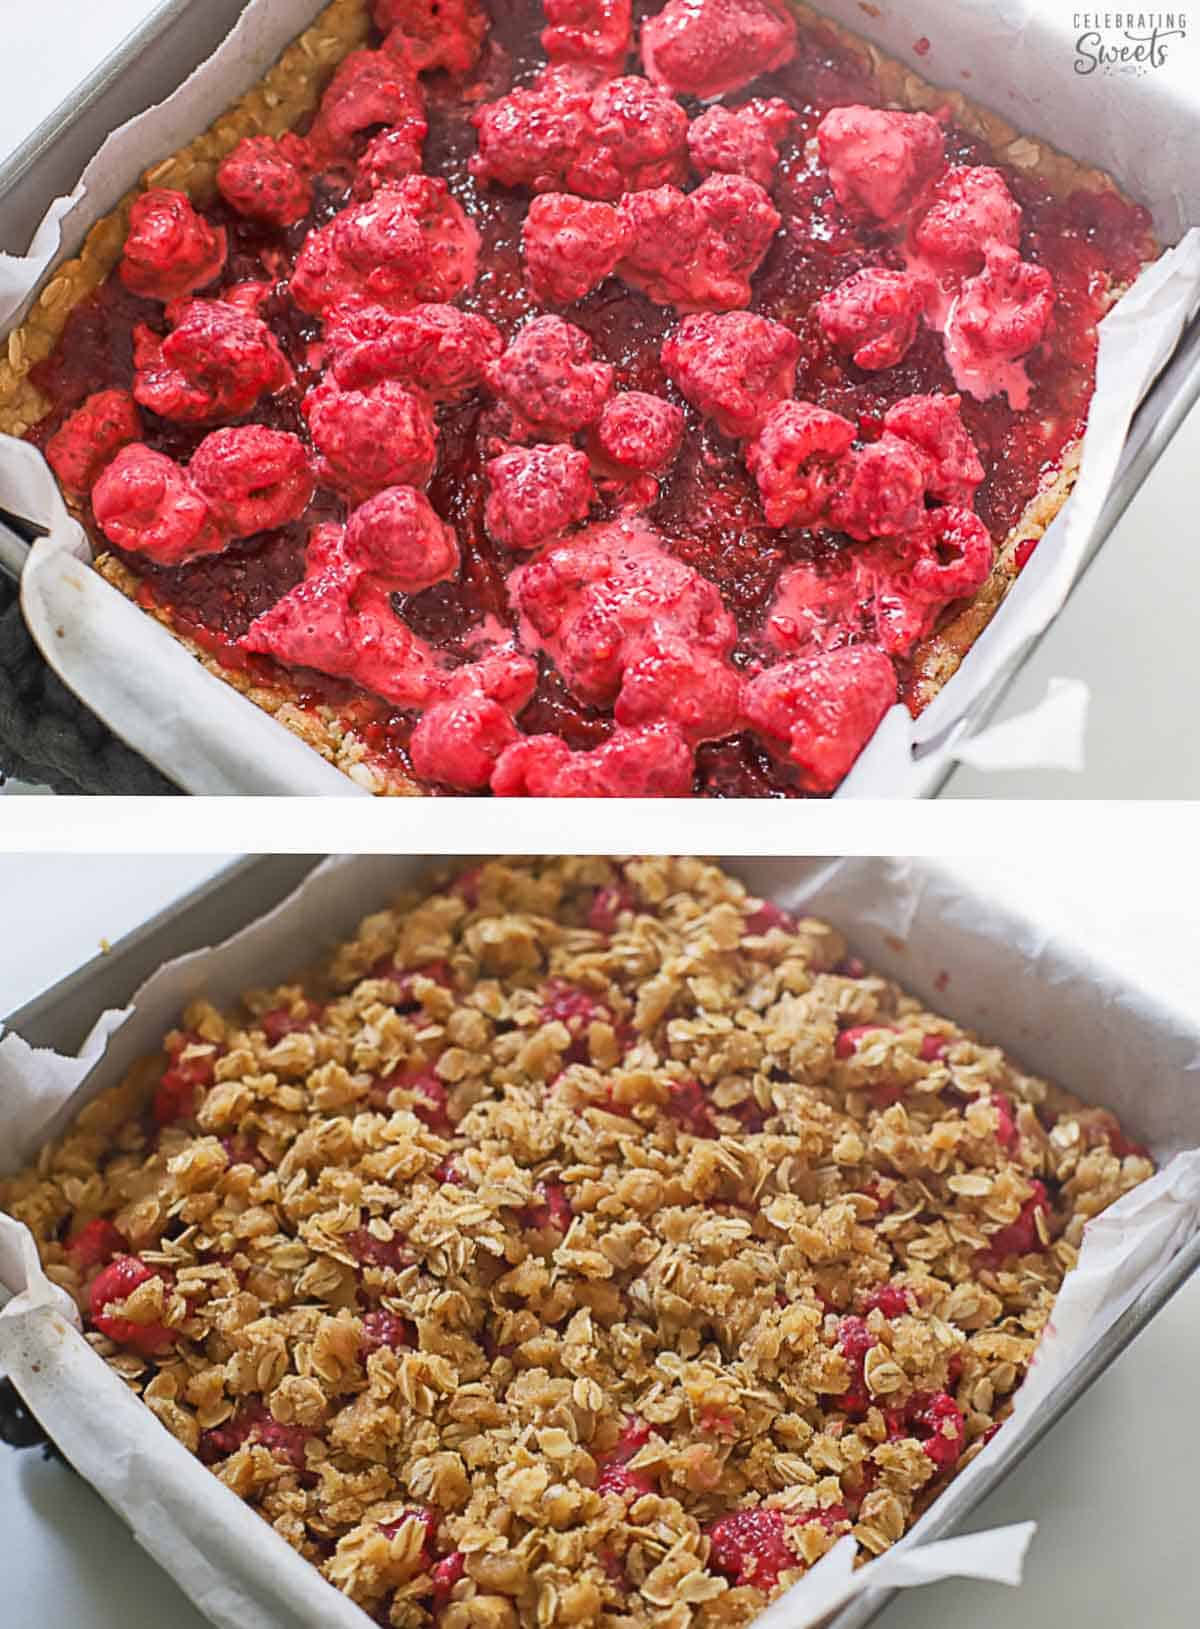 Collage of two photos showing unbaked raspberry bars (with and without crumb topping).